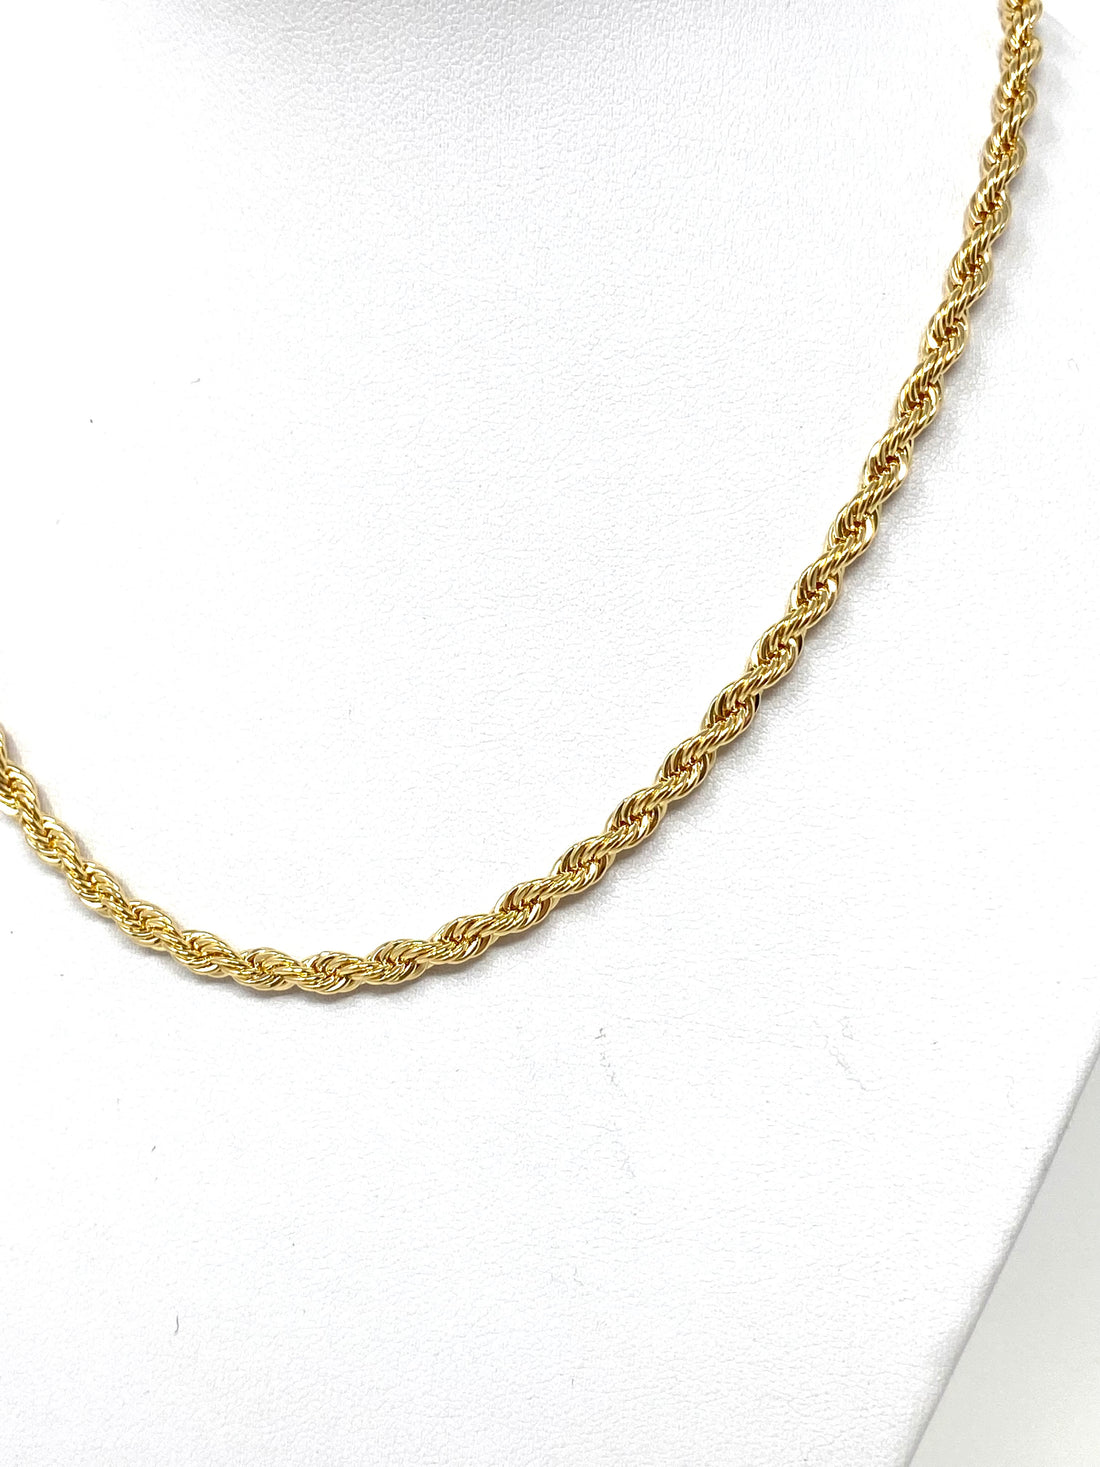 Miles 16" Chunky Rope Chain Necklace in 14k Gold